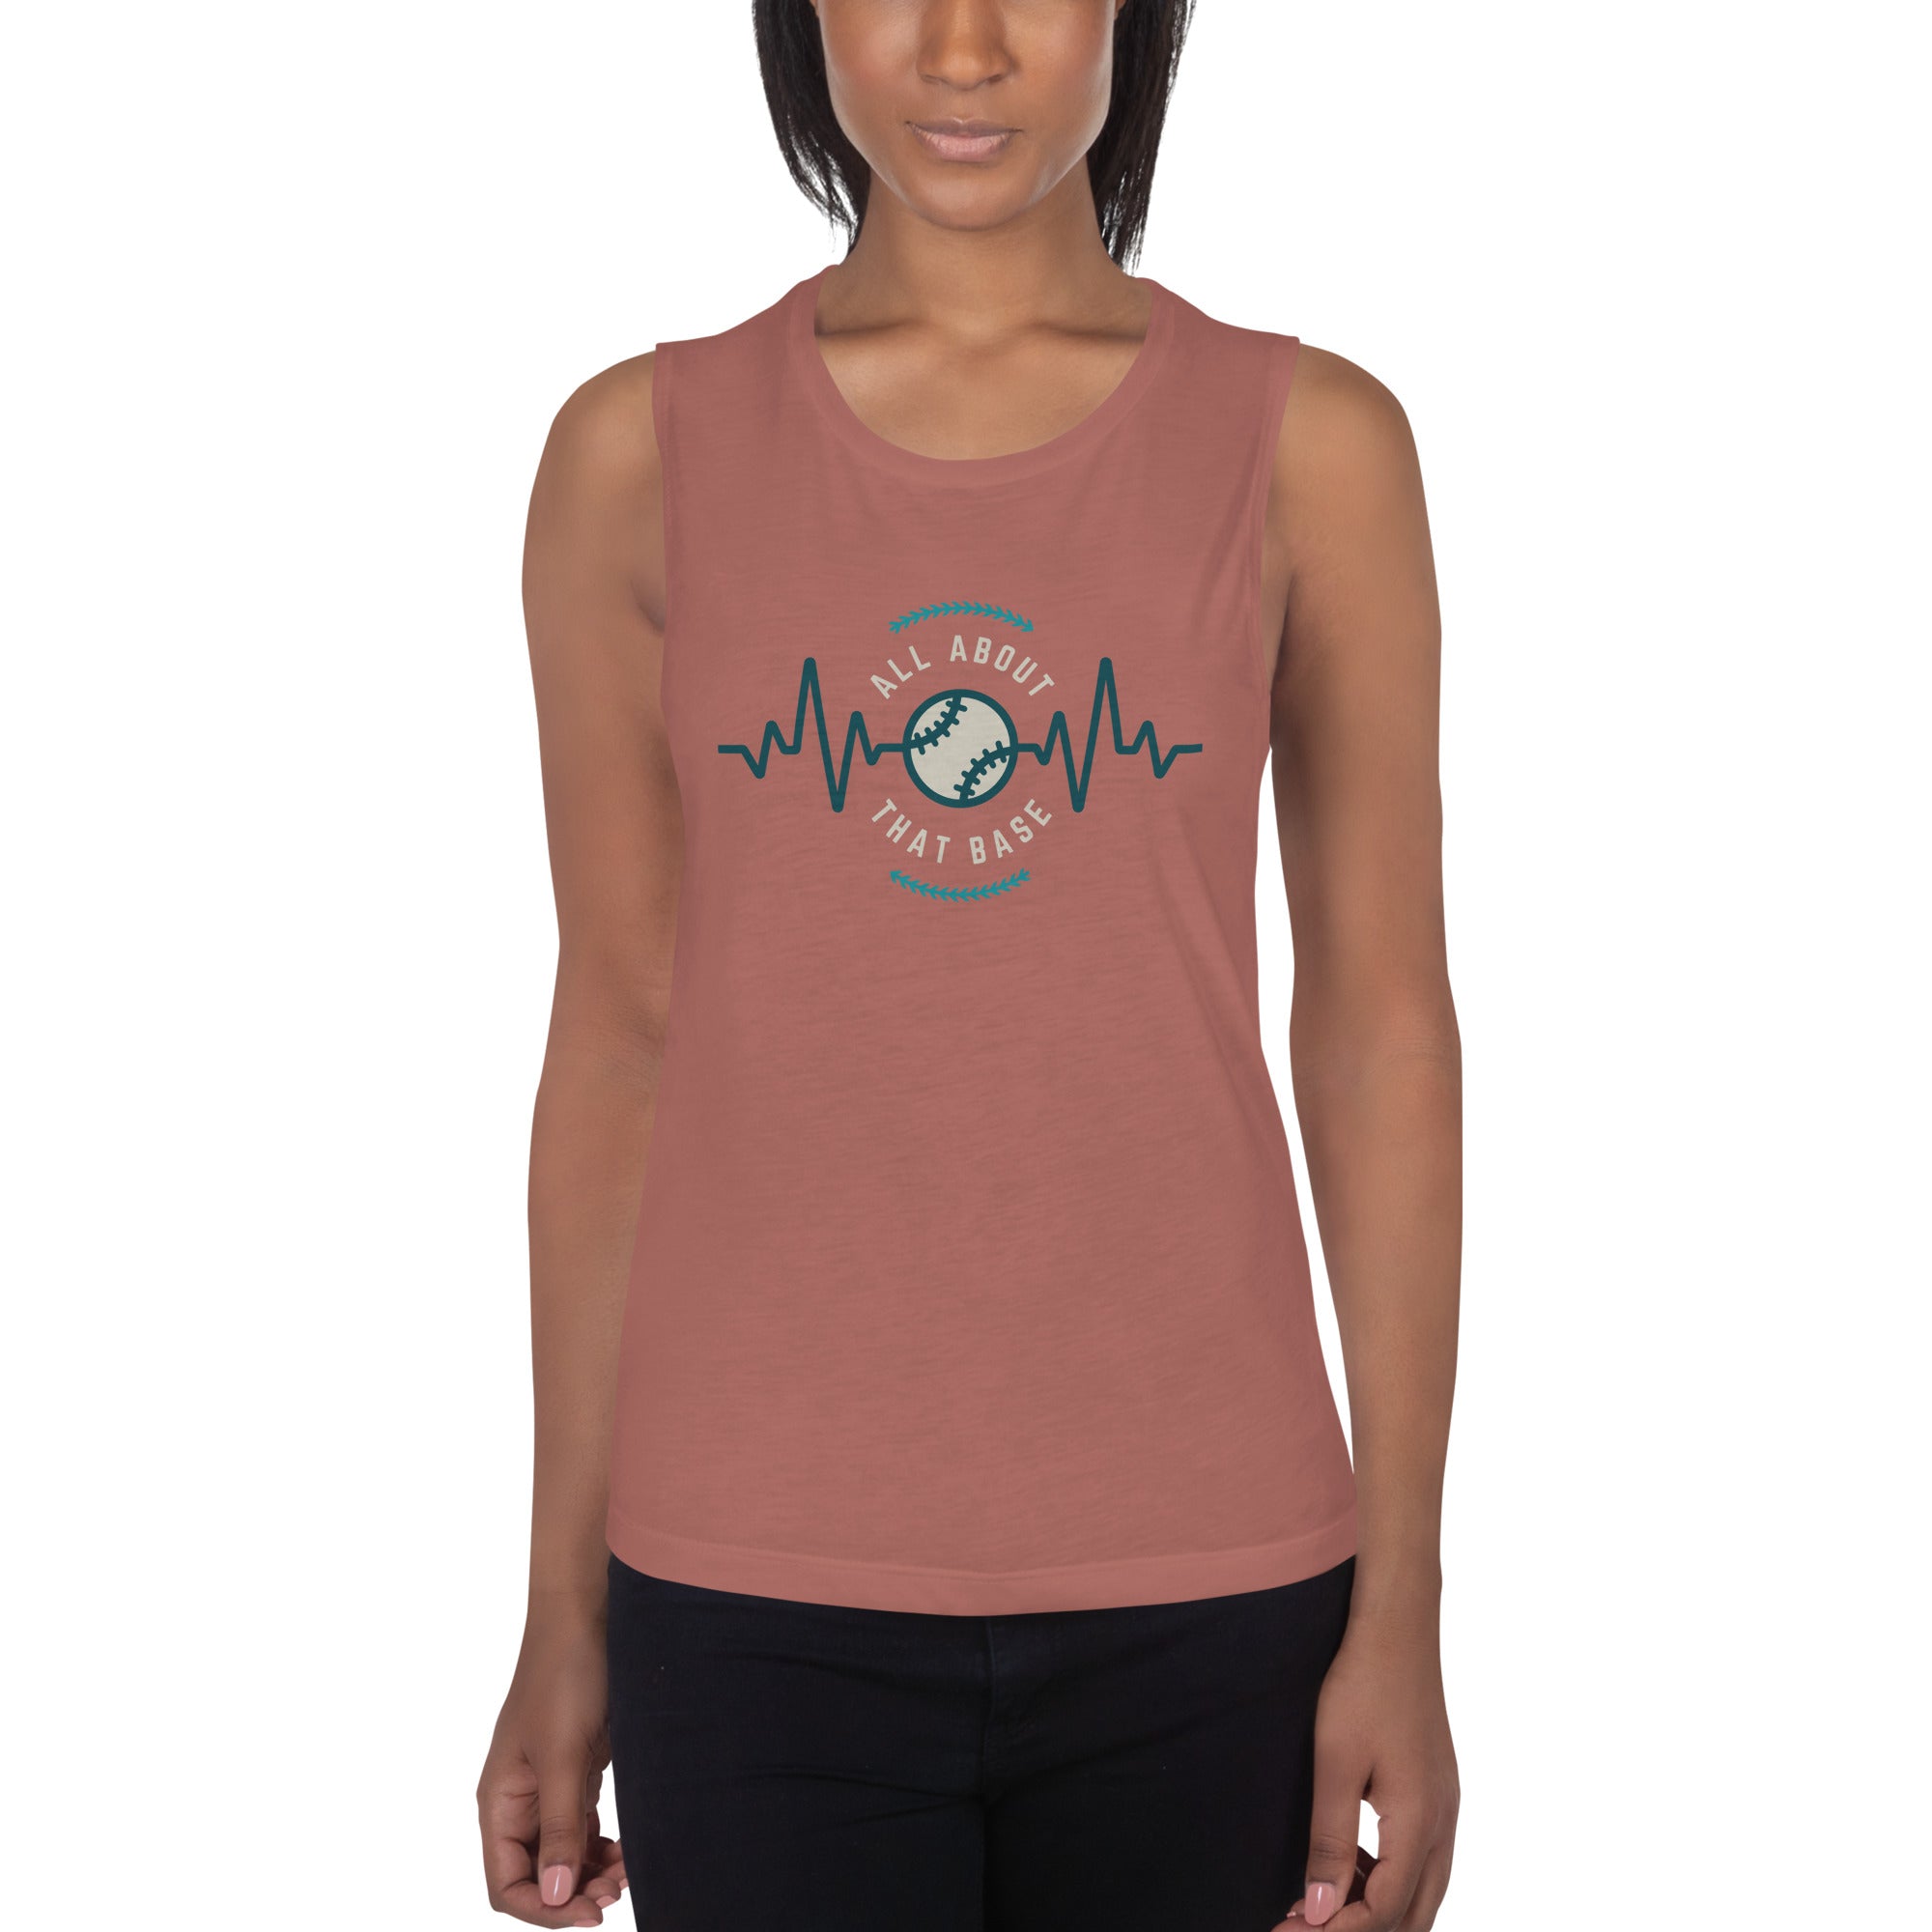 All About That Base Women's Muscle Tank